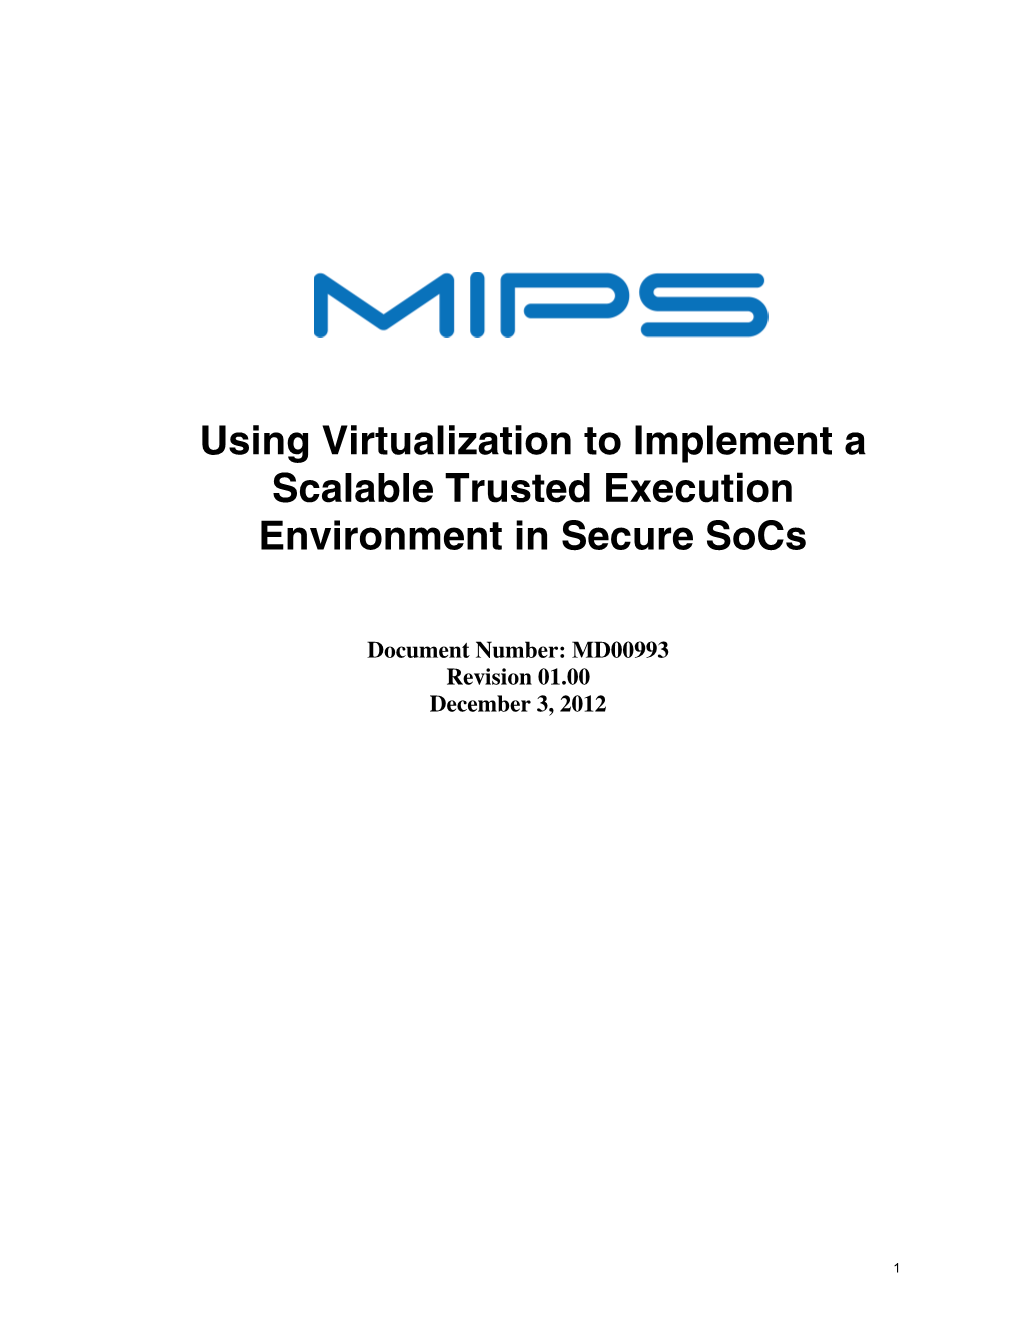 Using Virtualization to Implement a Scalable Trusted Execution Environment in Secure Socs